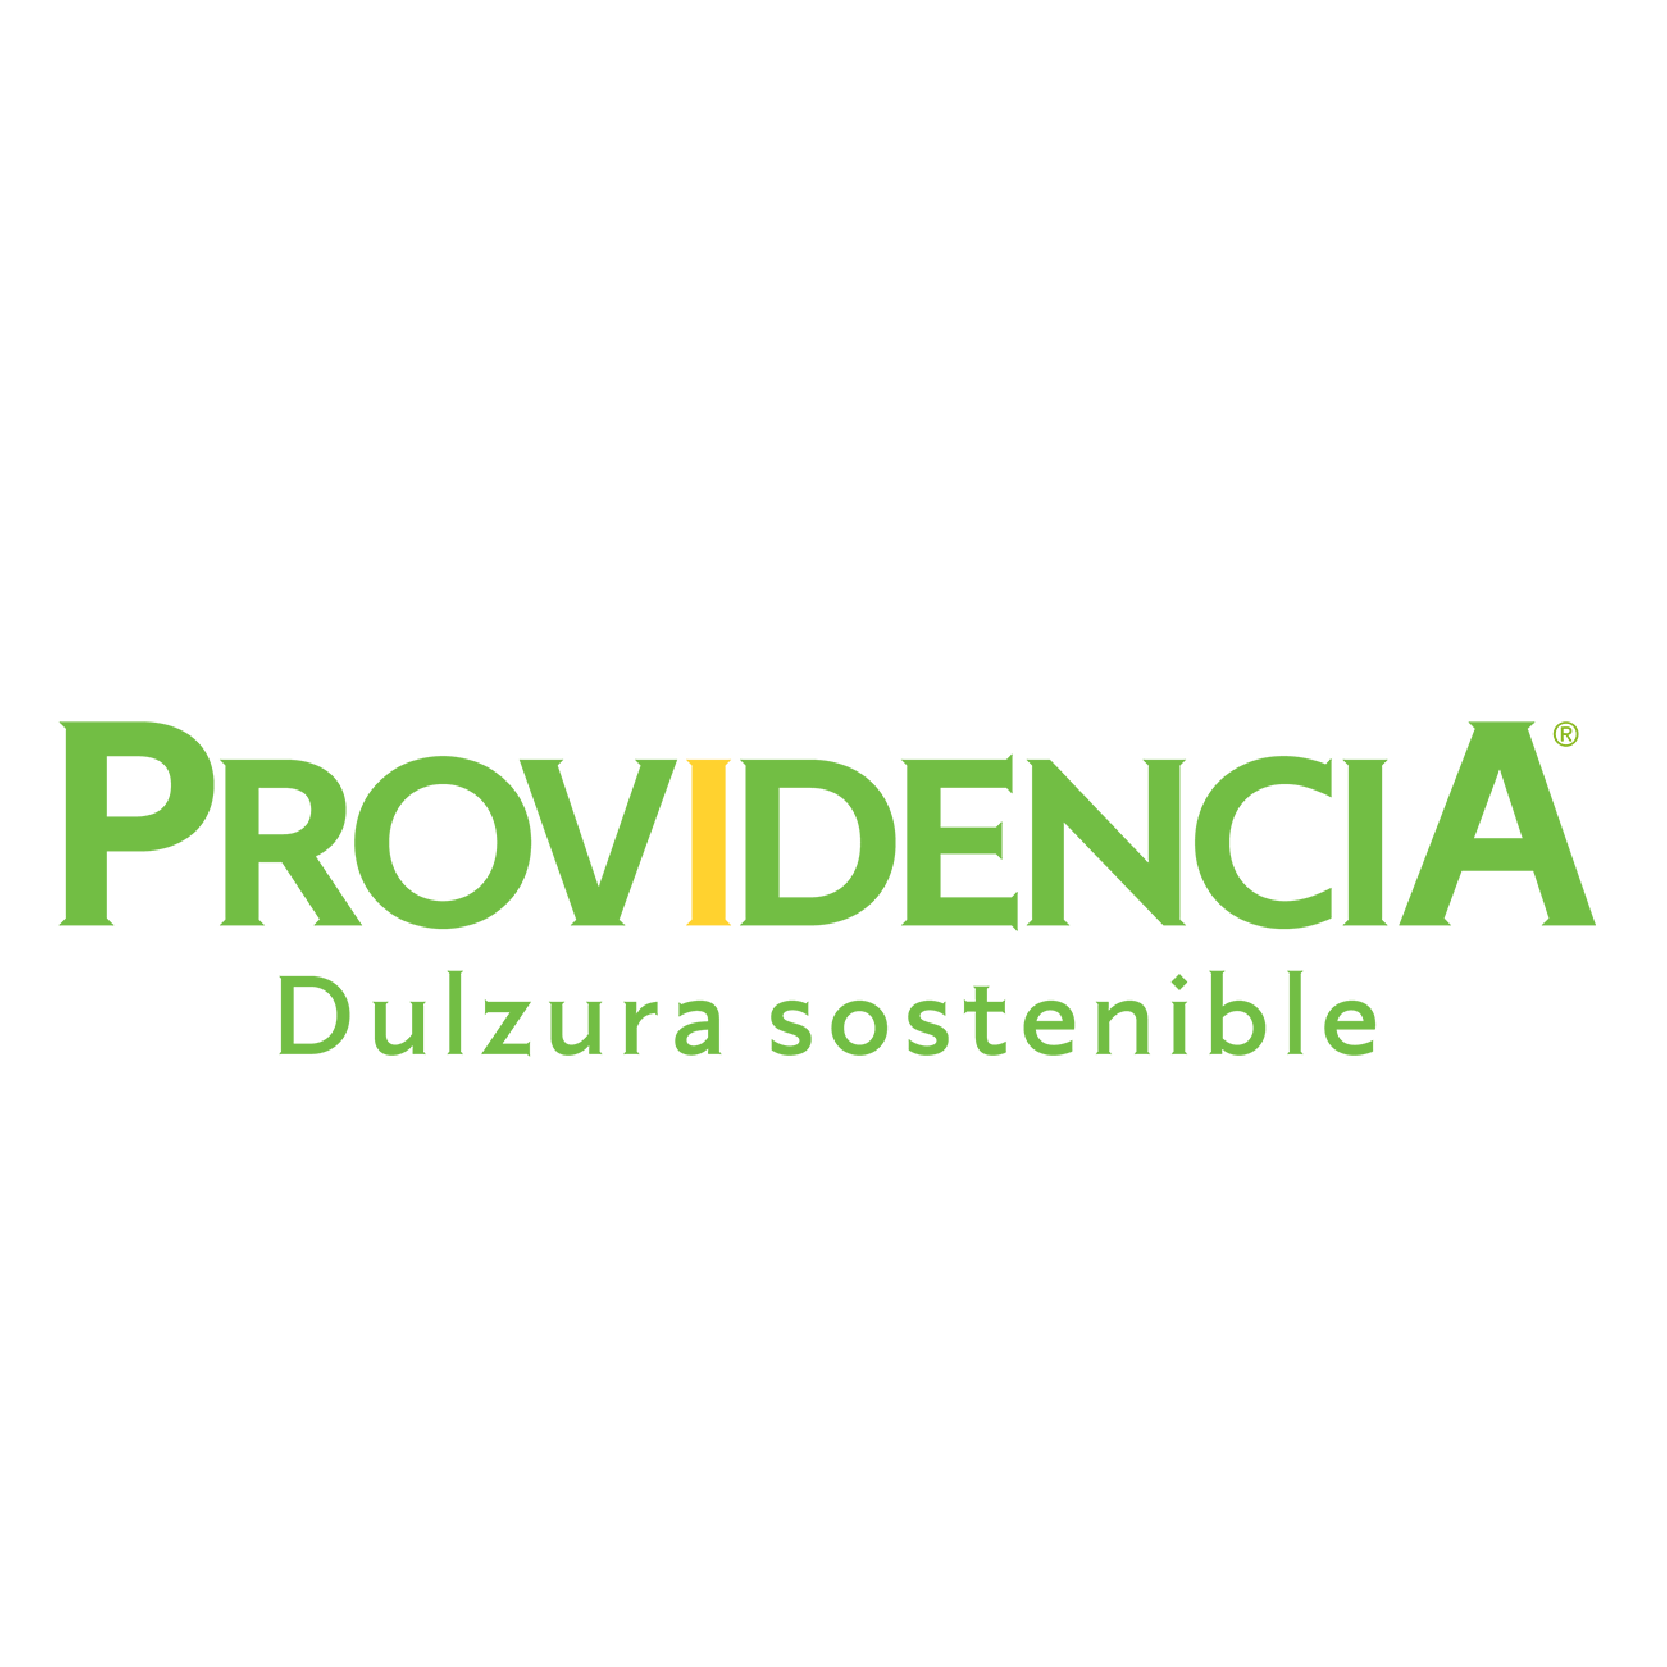 59_providencia.png